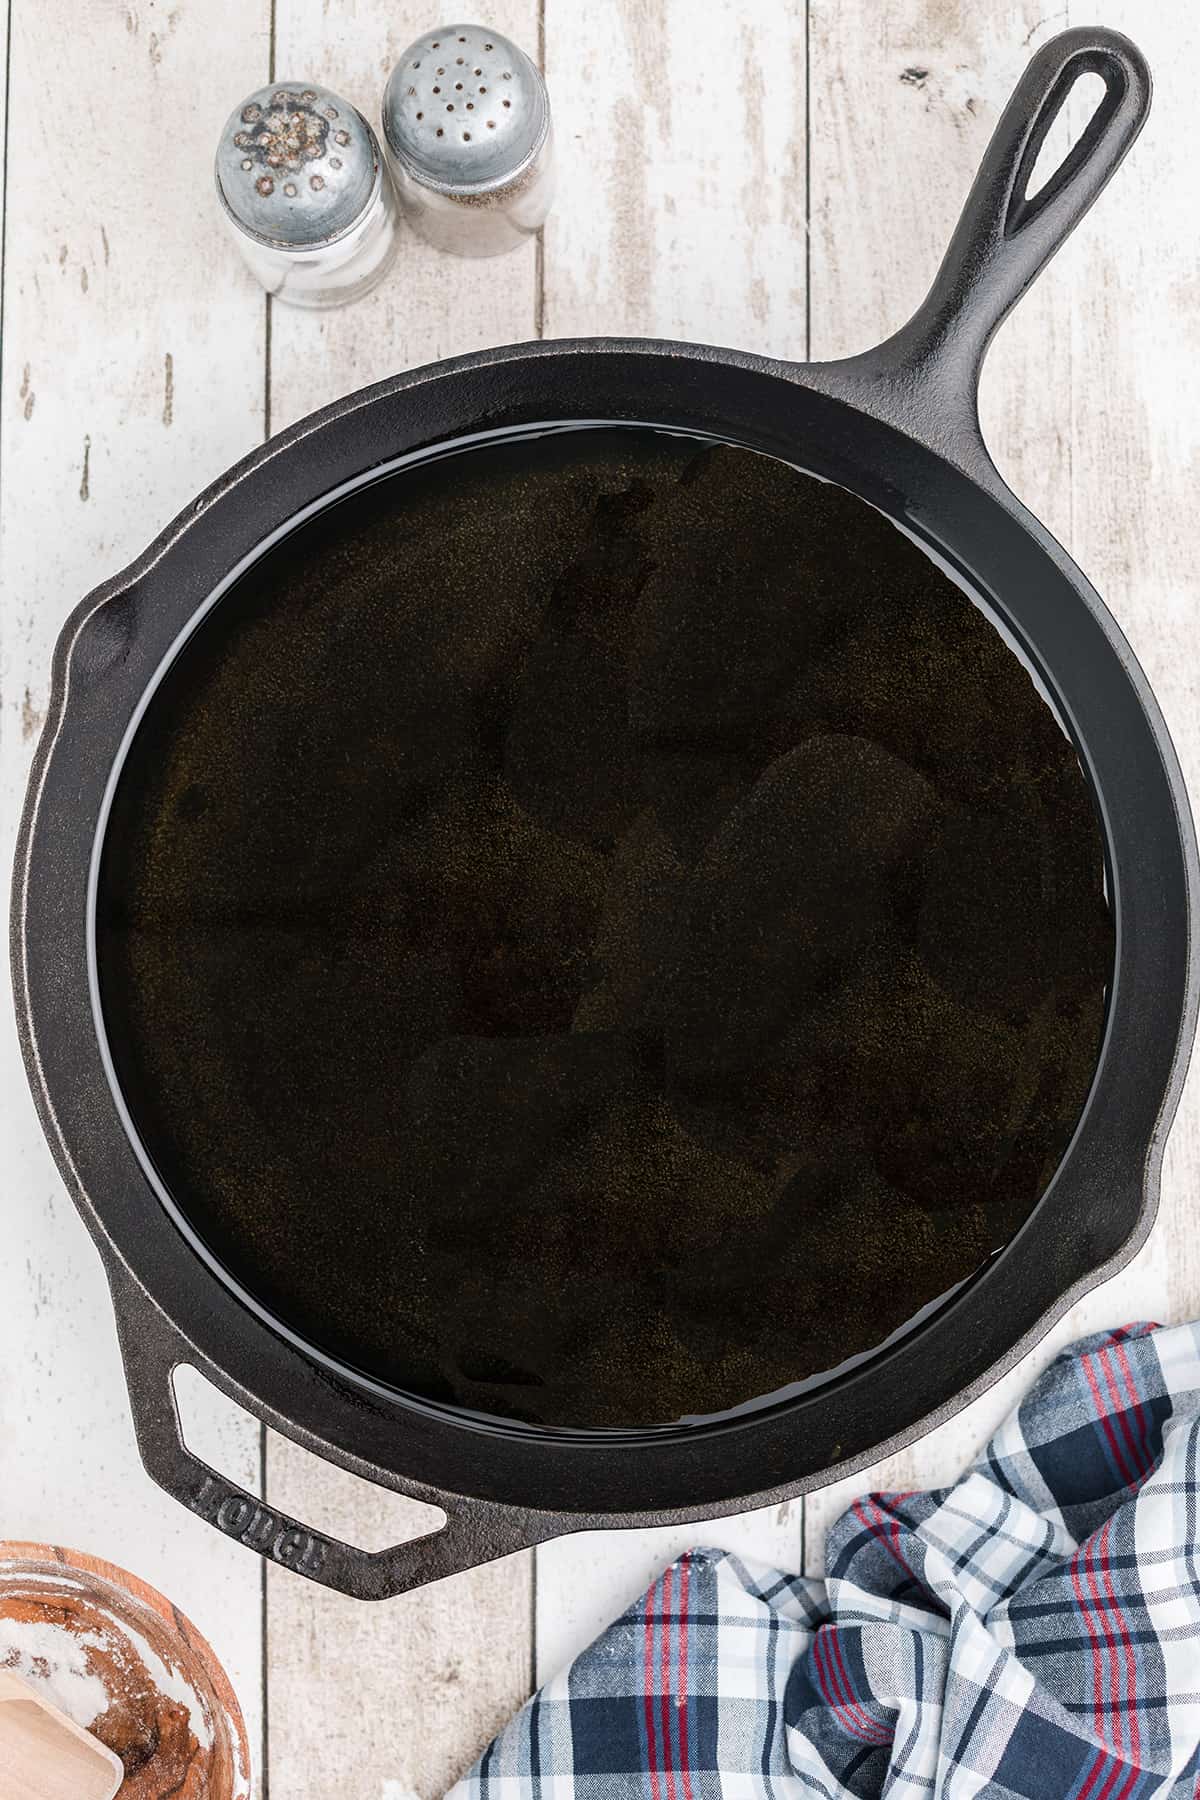 Oil heating in a cast iron skillet .